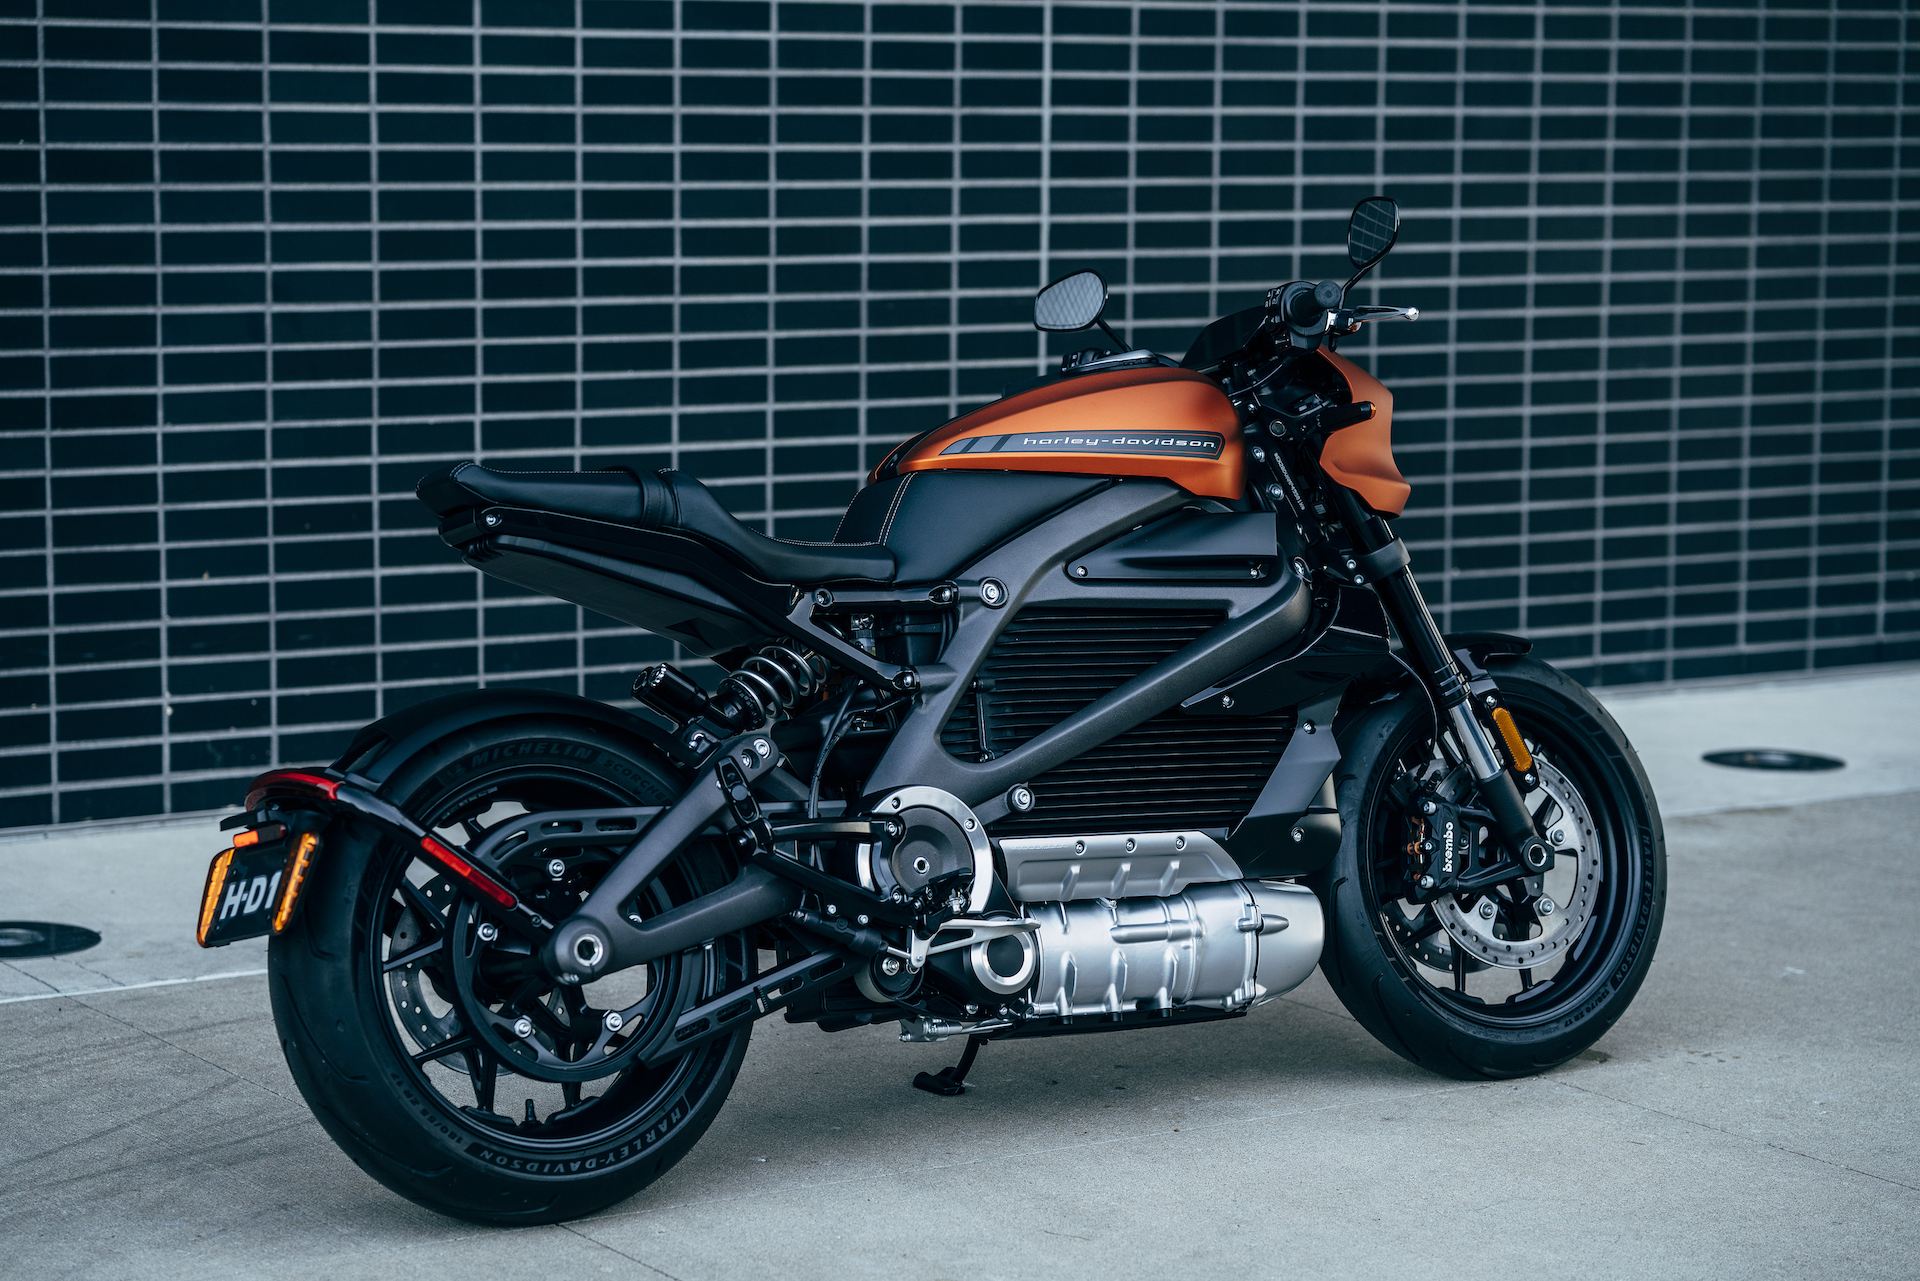 Harley-Davidson Livewire electric motorcycle to go into production